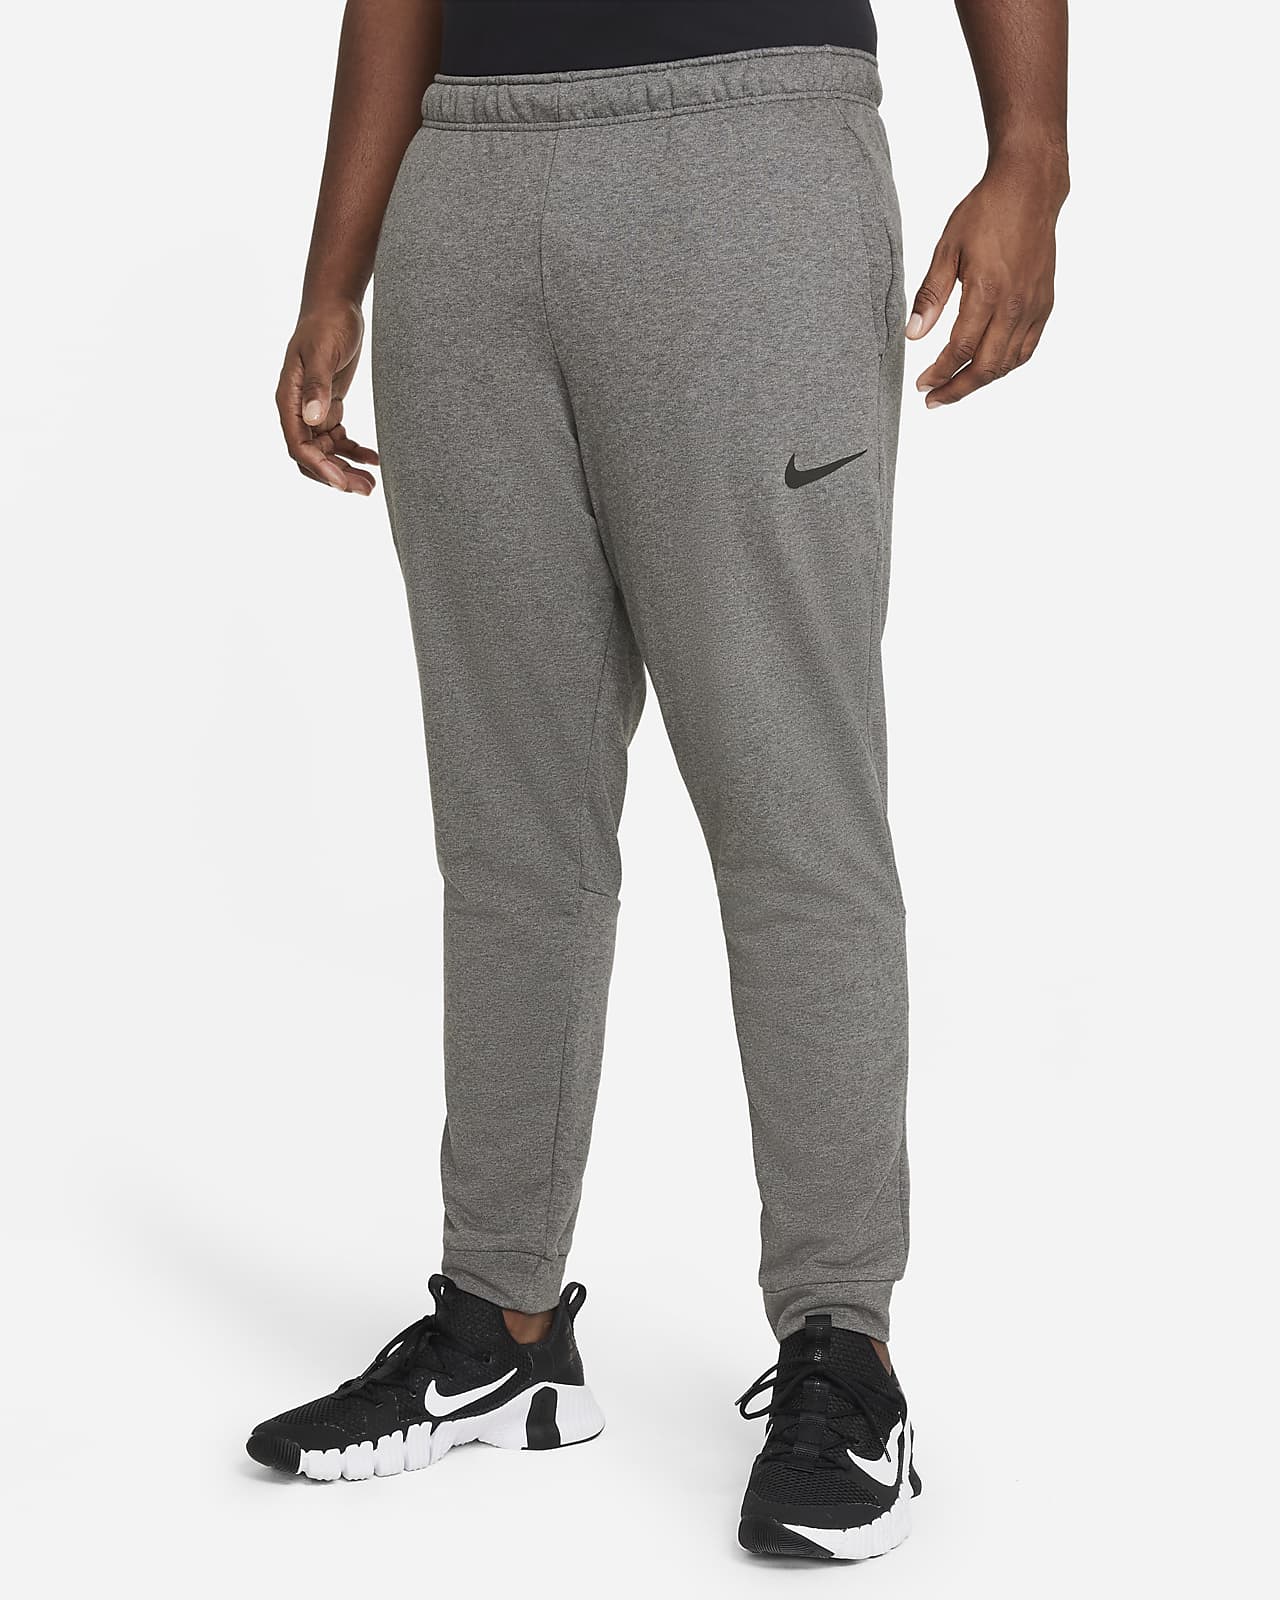 Nike Therma-FIT Men's Tennis Pants - Charcoal Heather